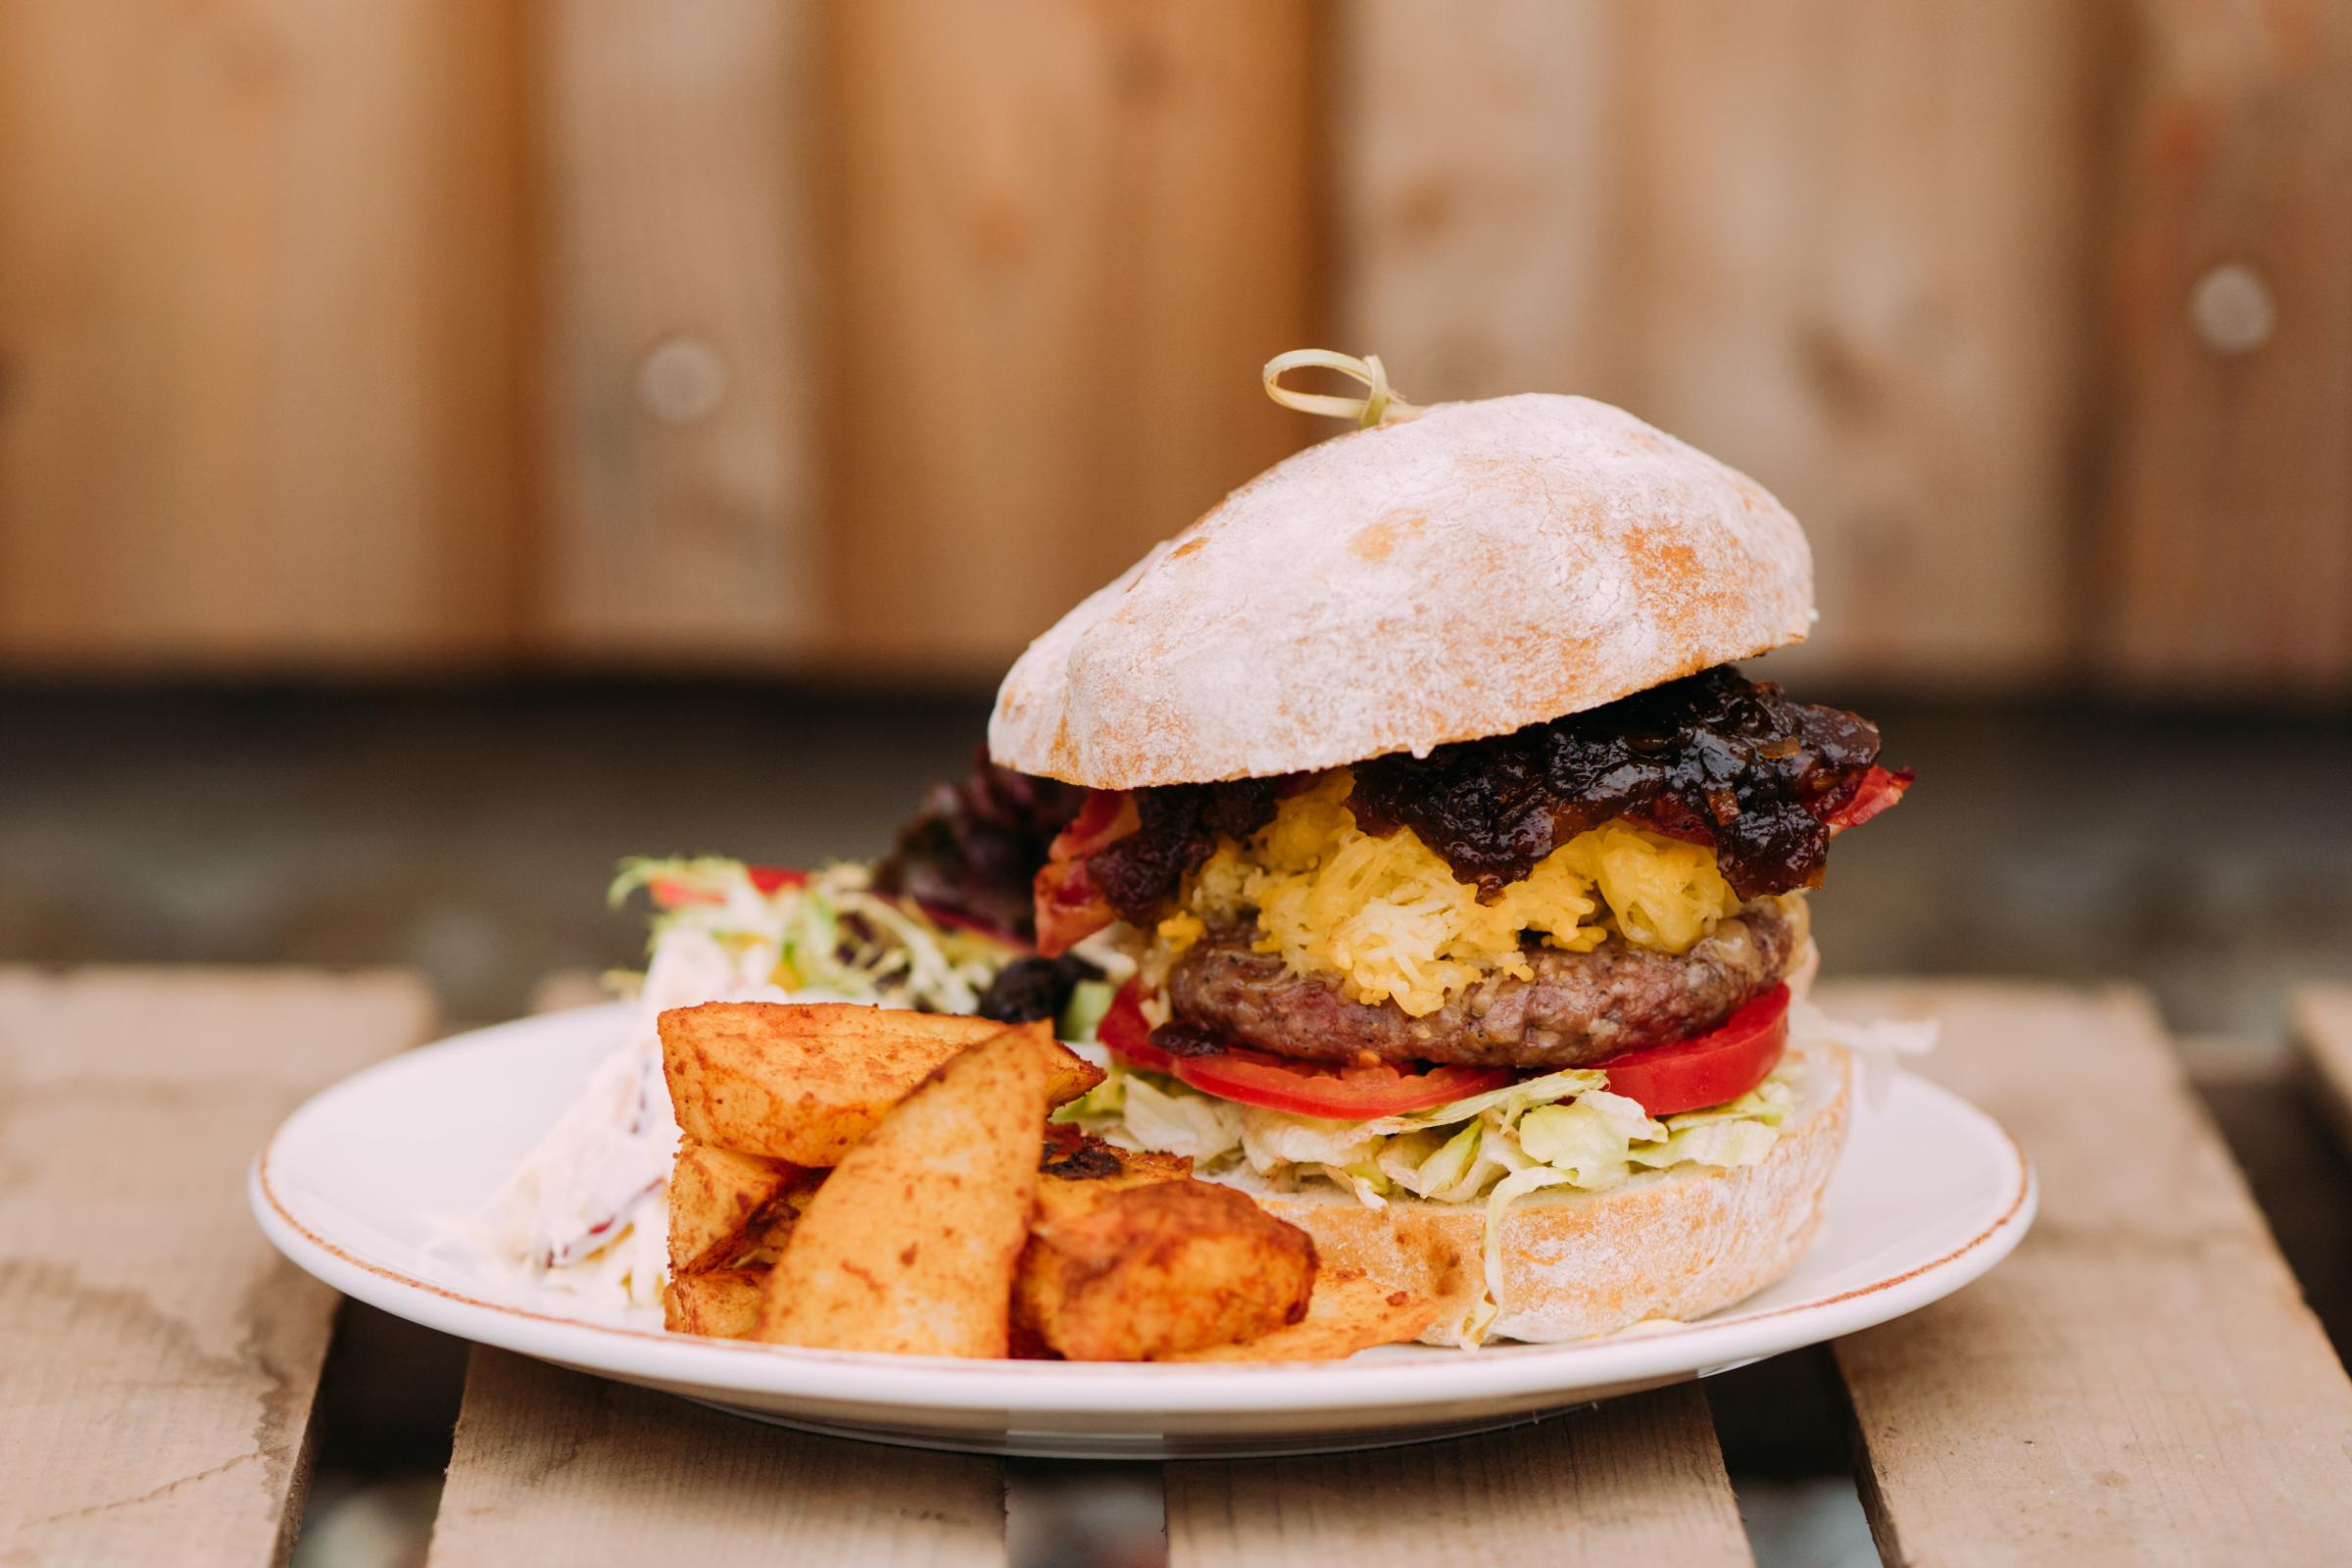 One of the more popular items on the menu - a reallsy tasty burger with home-made beefy chips